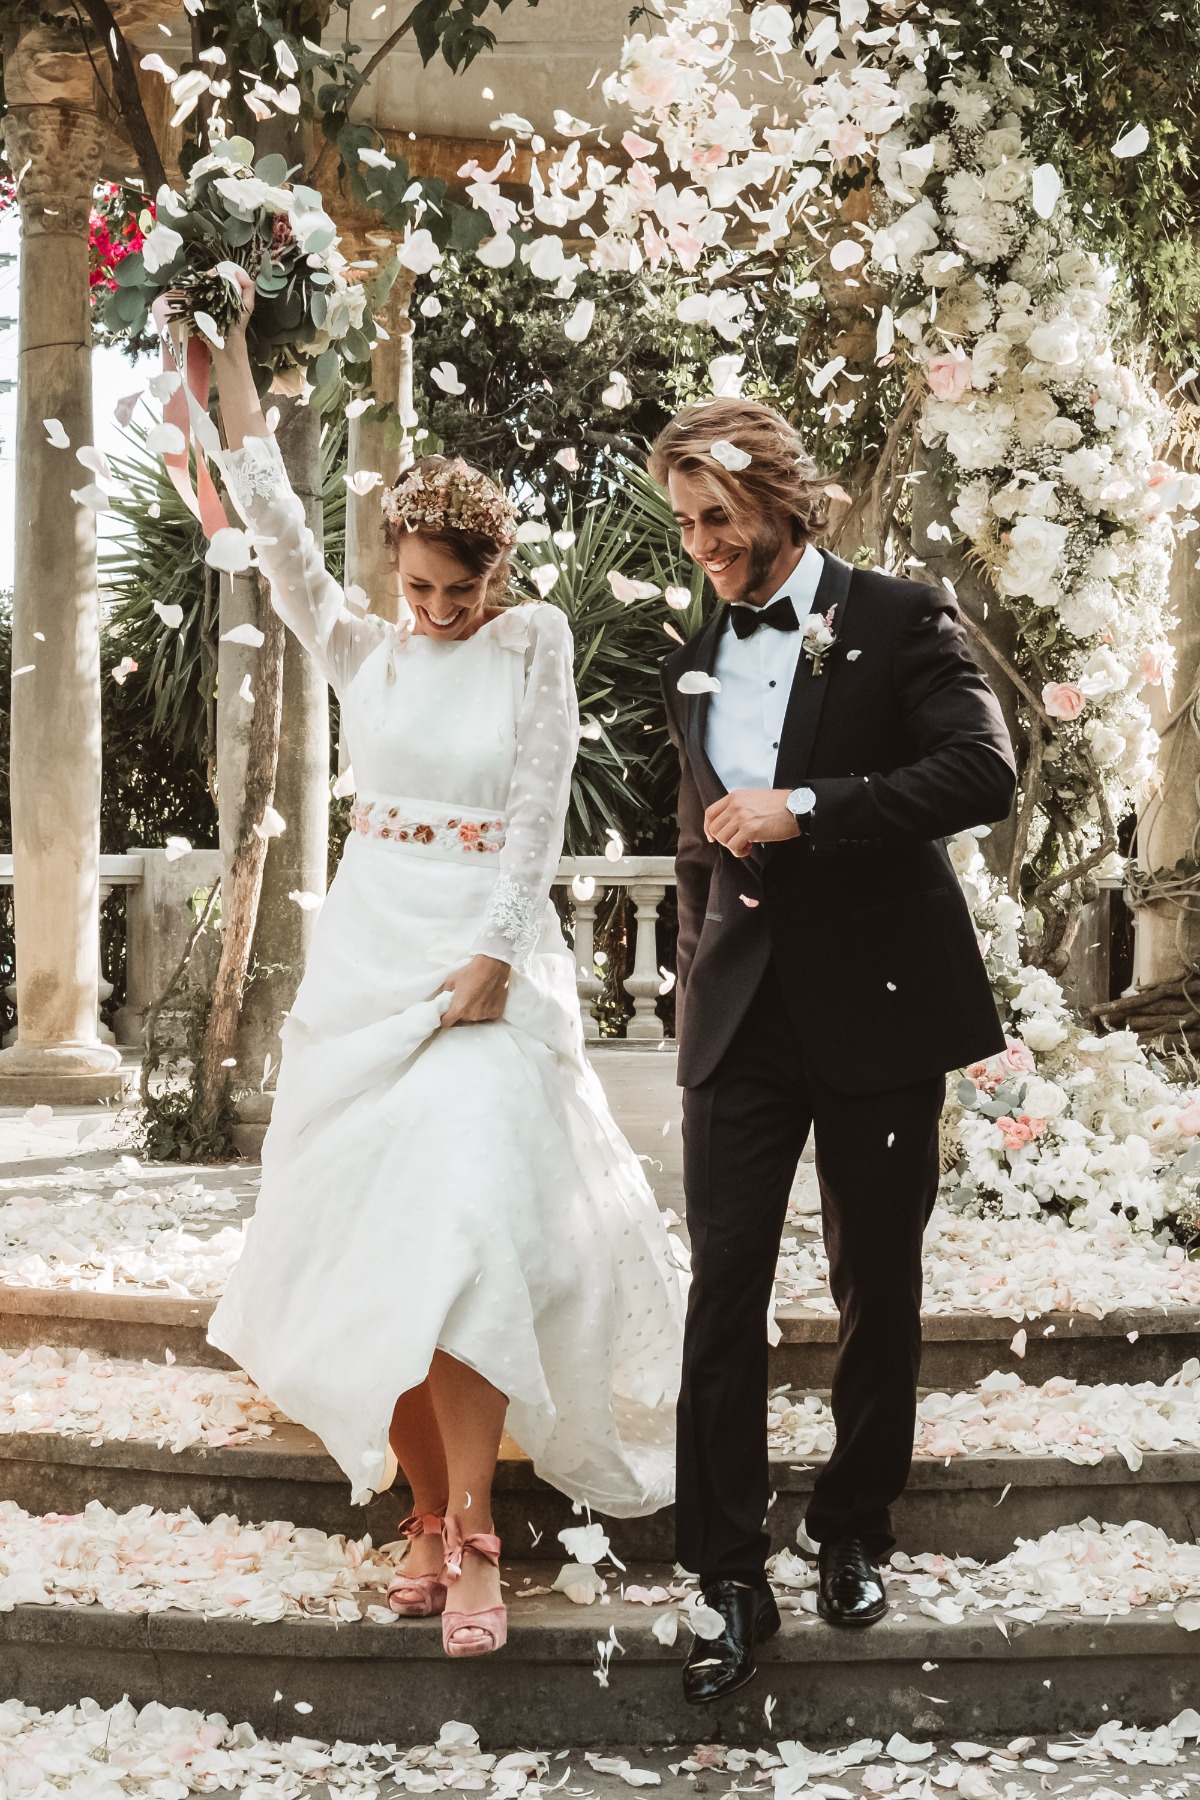 A Fairytale Styled Shoot In Spain With A Rosy Glow